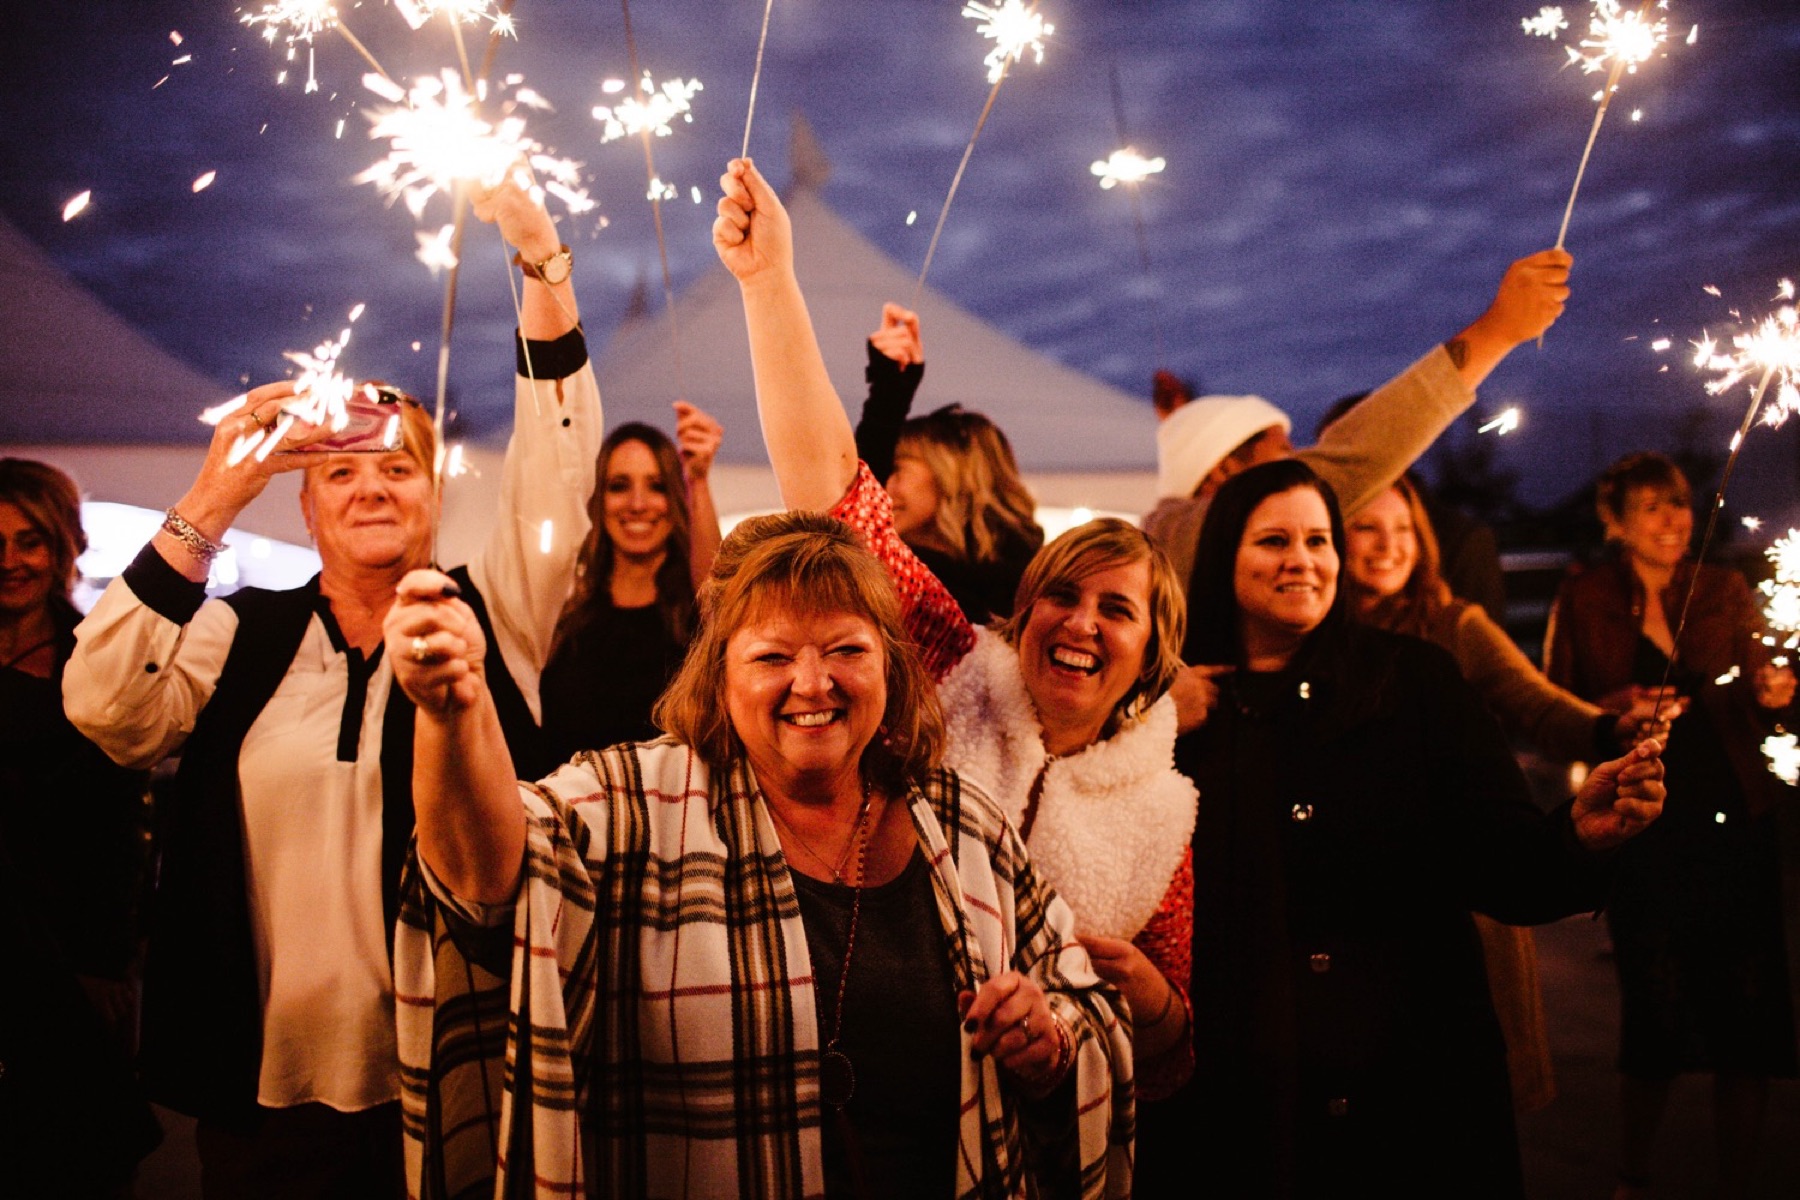 guests wave sparklers in the air at wedding reception